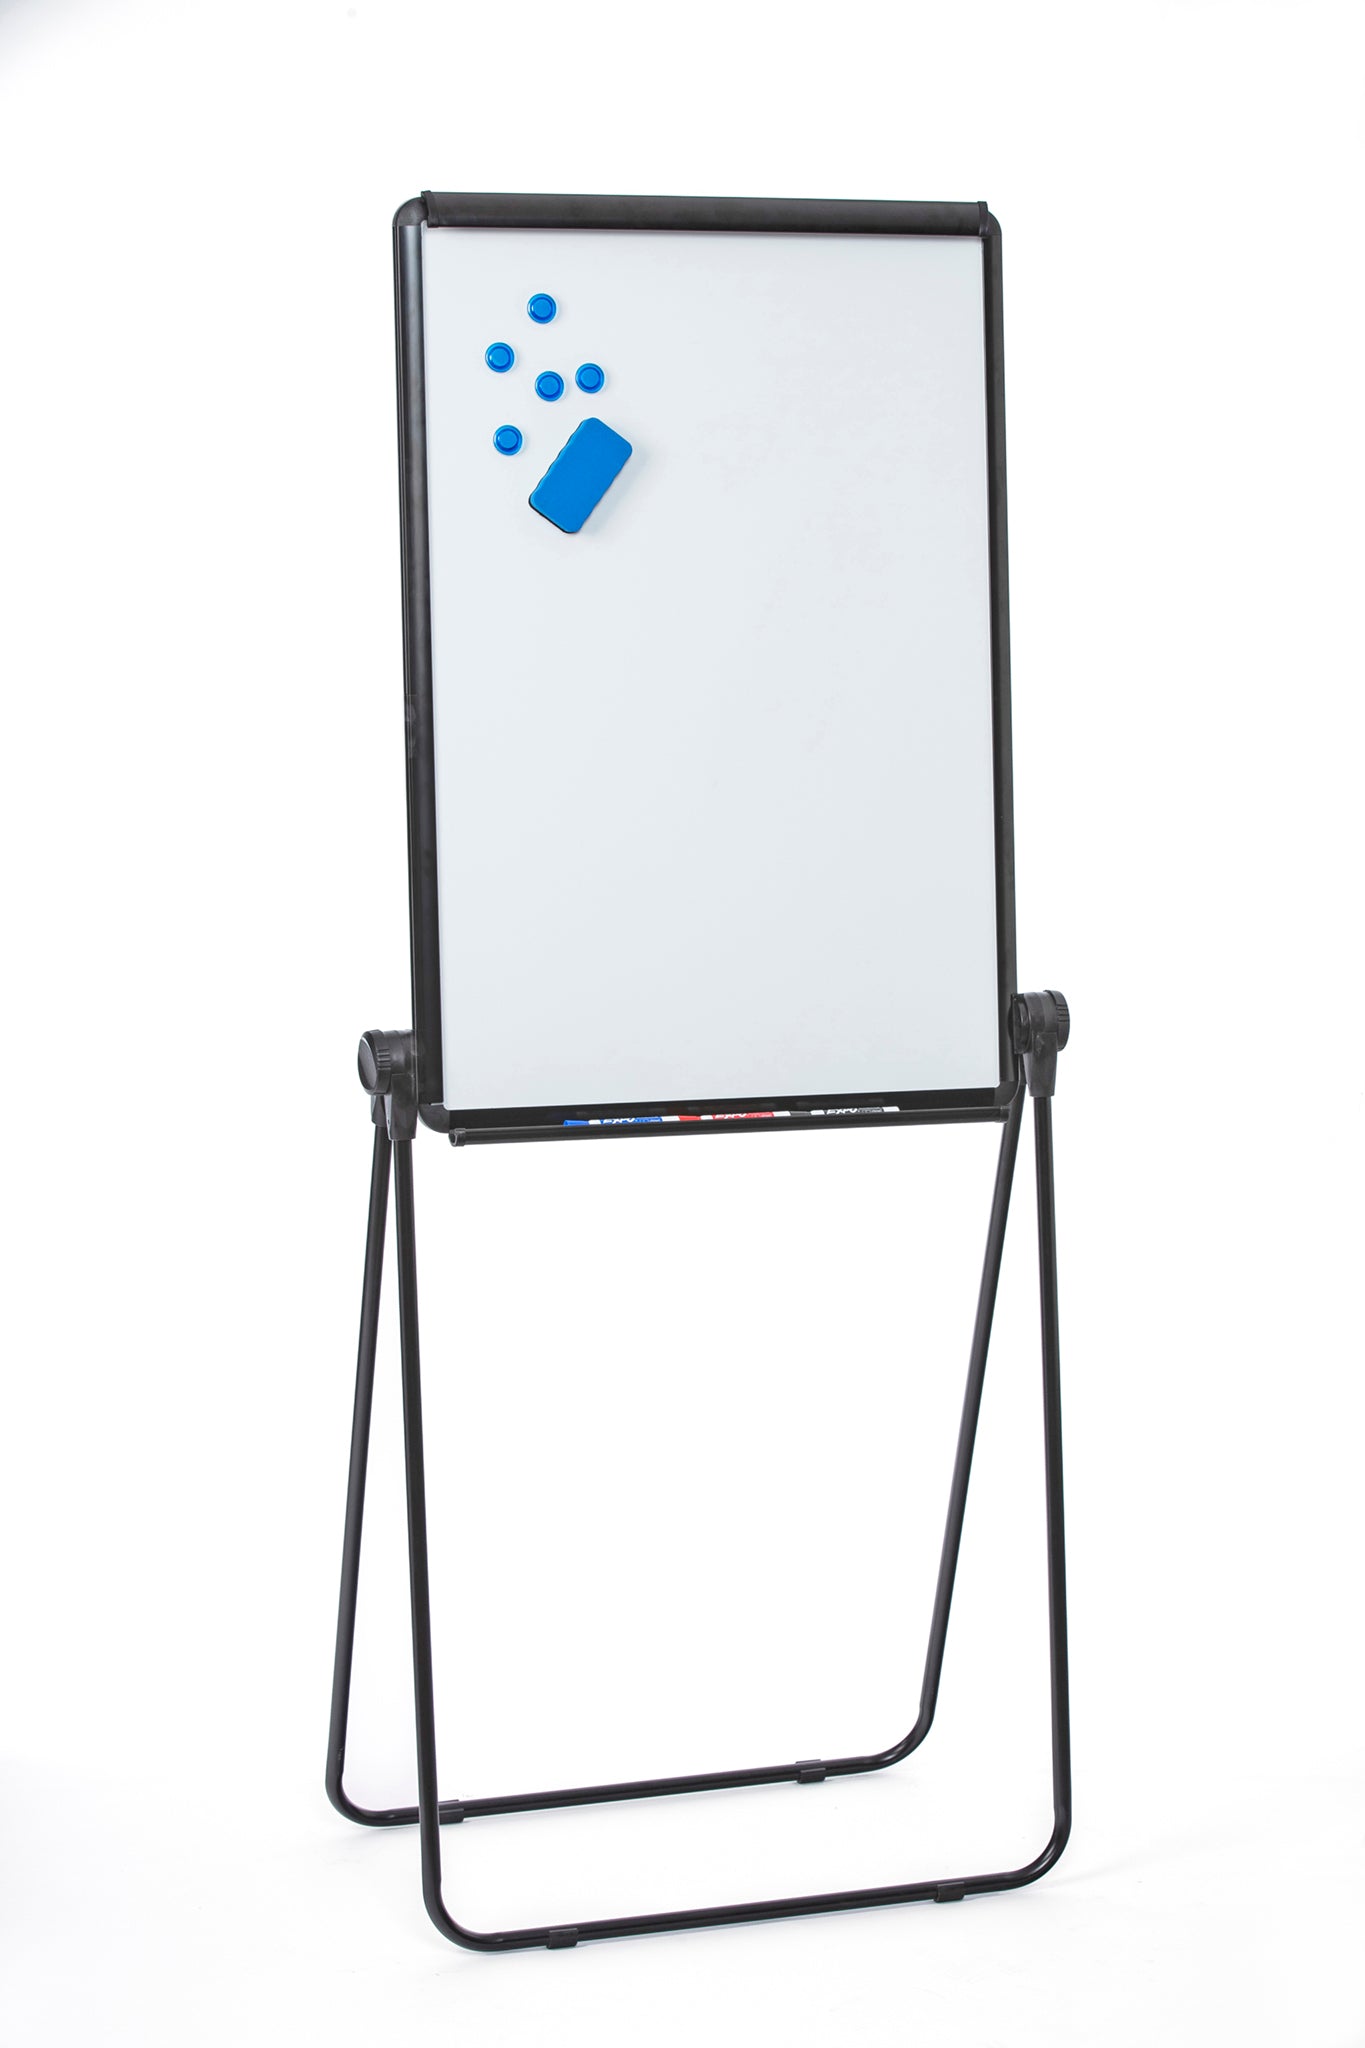 Shown Fully Extended with 5 Blue Magnets and 1 Blue Eraser. Magnetic Dry-Erase Presentation Easel (25" x 36")